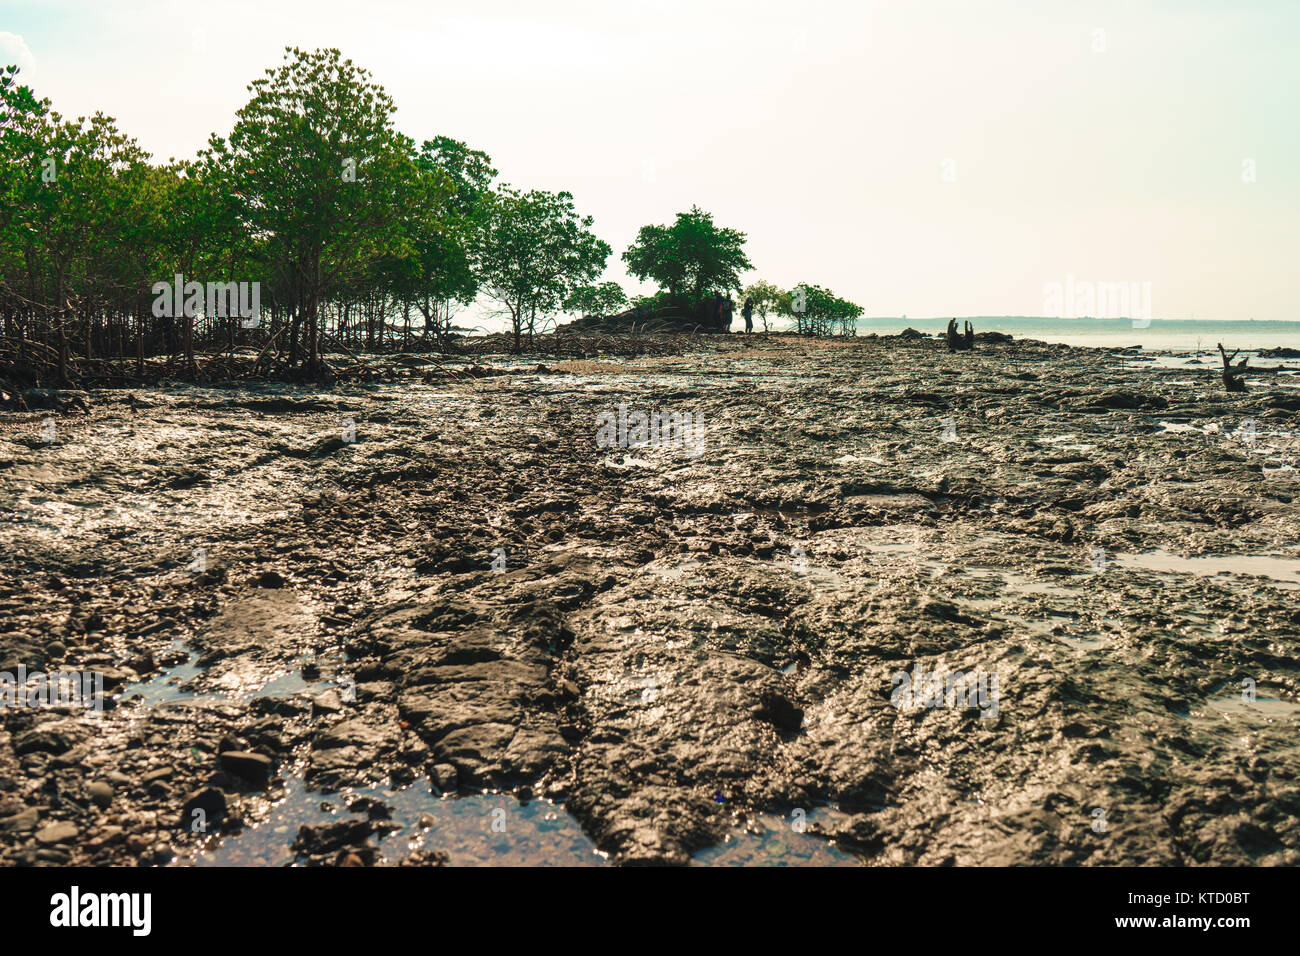 The mangrove forest on the island Stock Photo